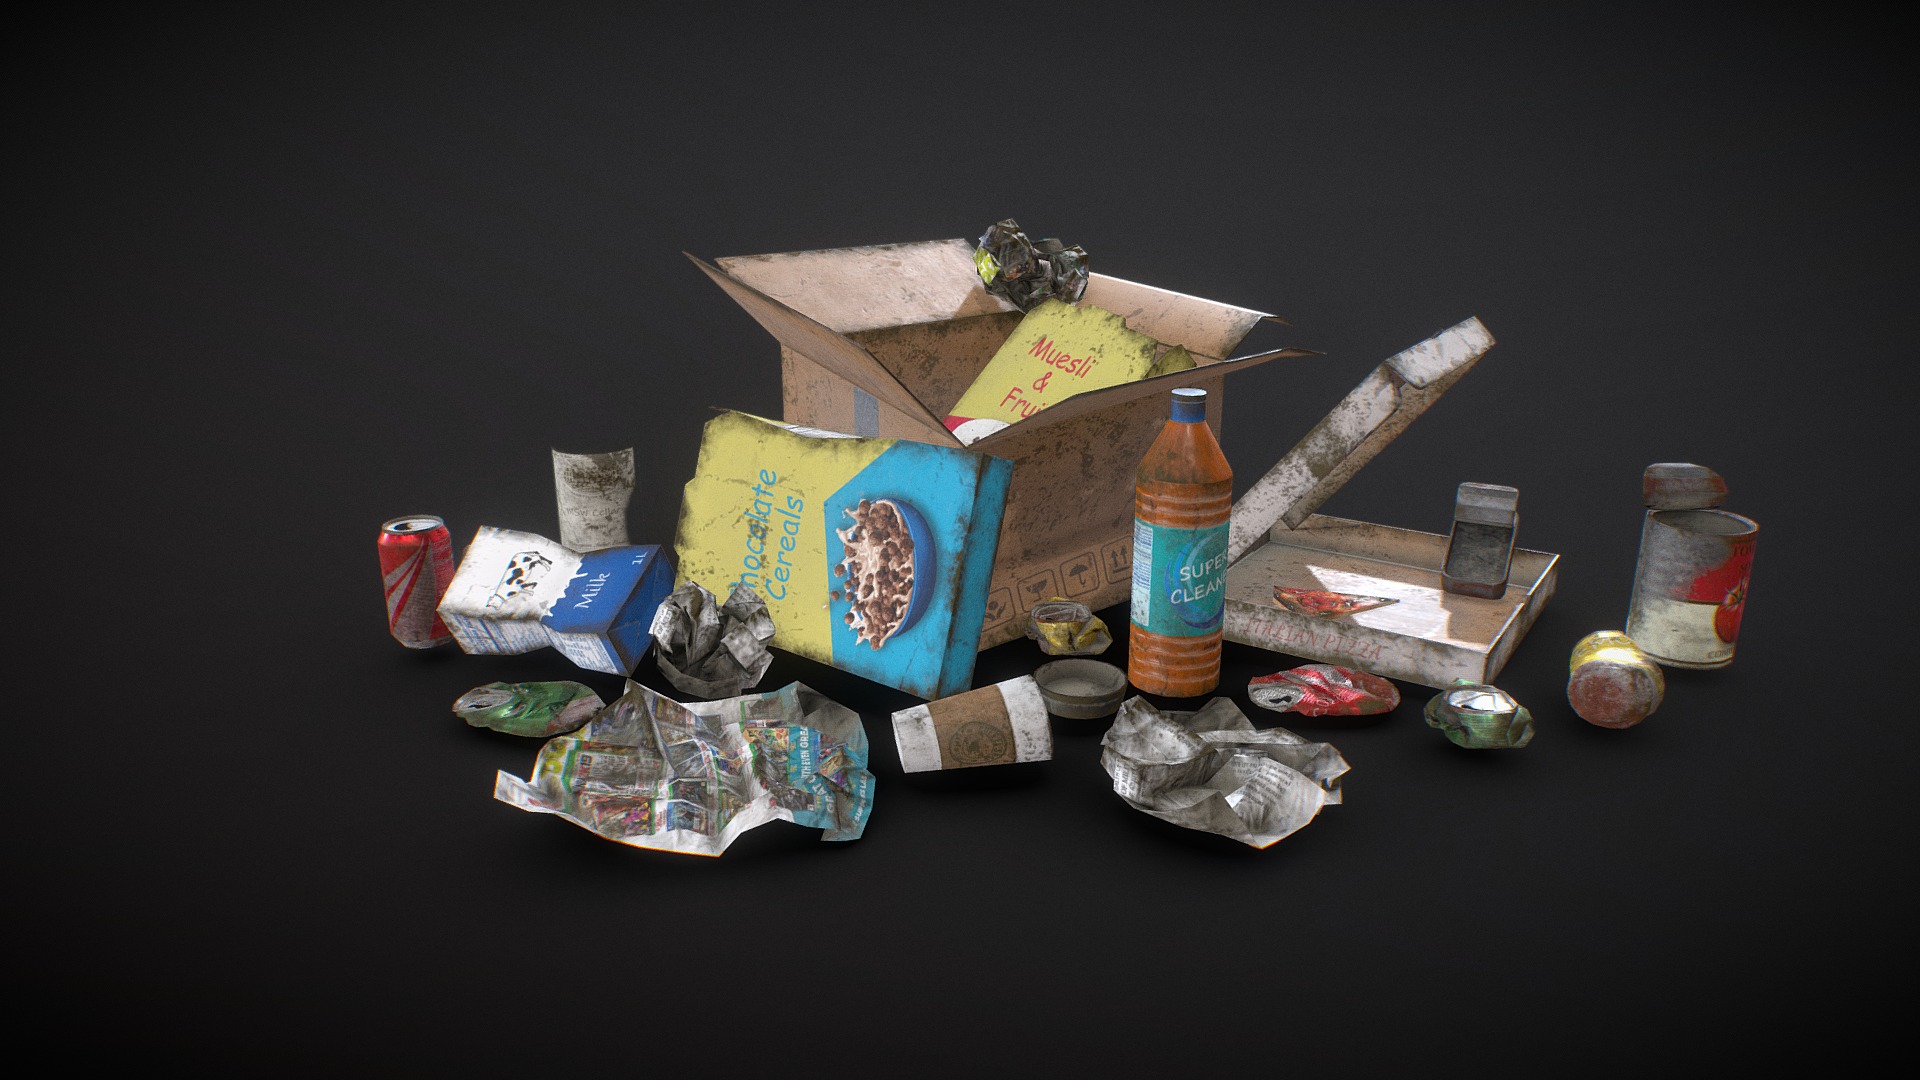 3D model Urban Trash – Low Poly - This is a 3D model of the Urban Trash - Low Poly. The 3D model is about a group of objects on a surface.